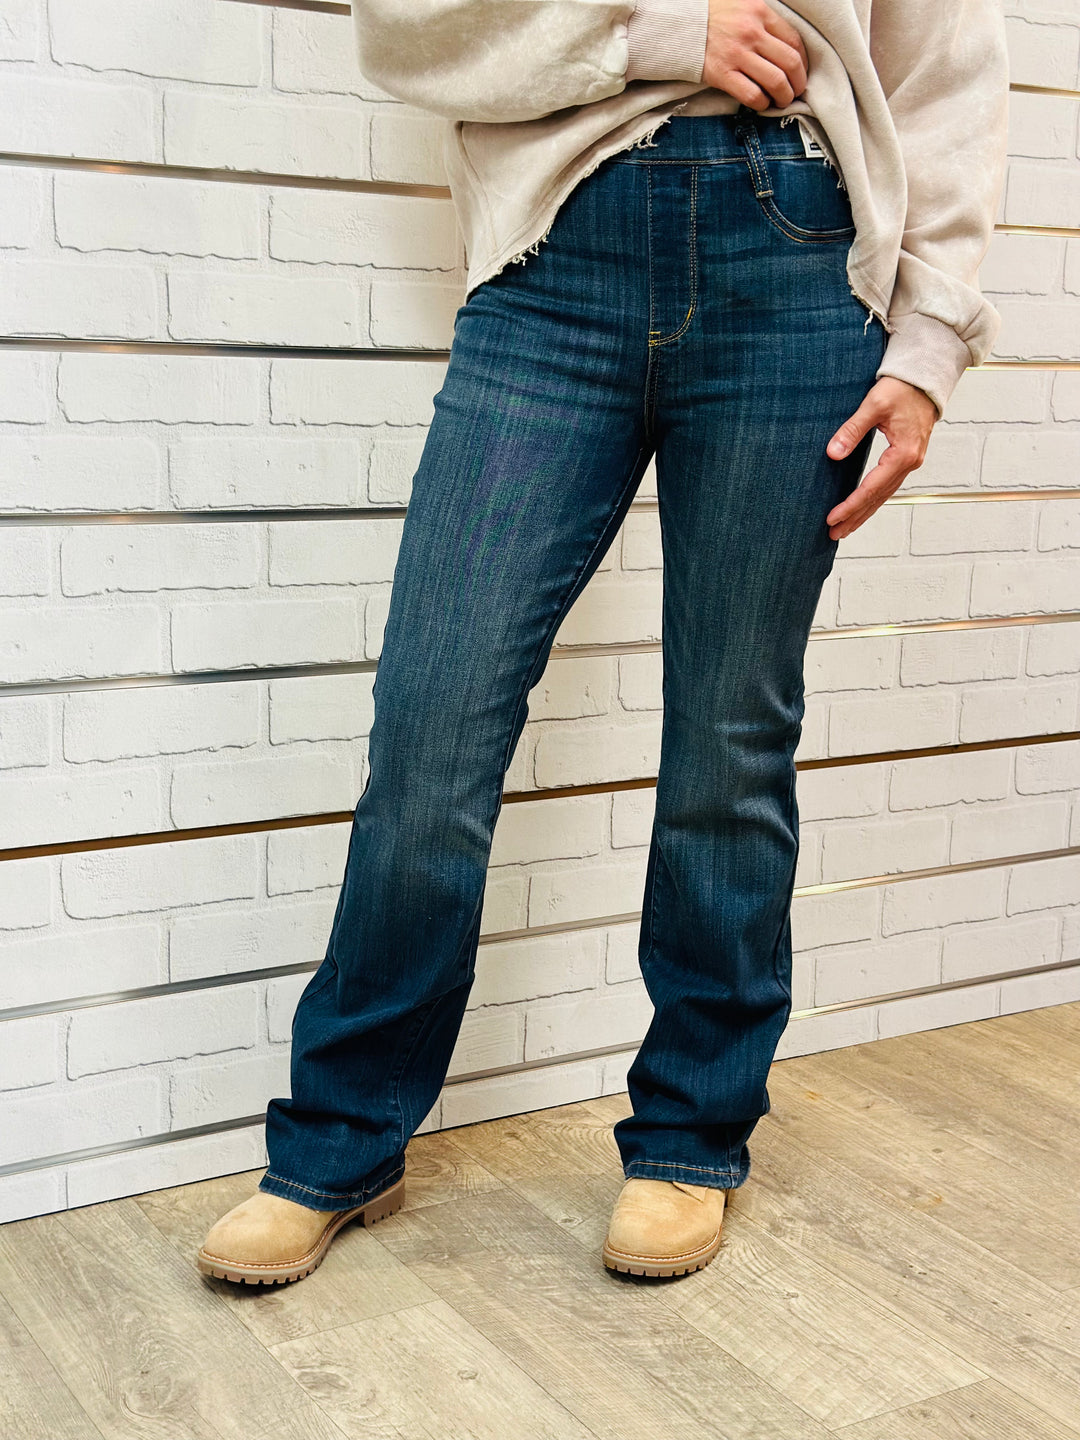 Judy Blue High Waist Vintage Pull On Bootcut Jeans-Jeans-Judy Blue-Evergreen Boutique, Women’s Fashion Boutique in Santa Claus, Indiana